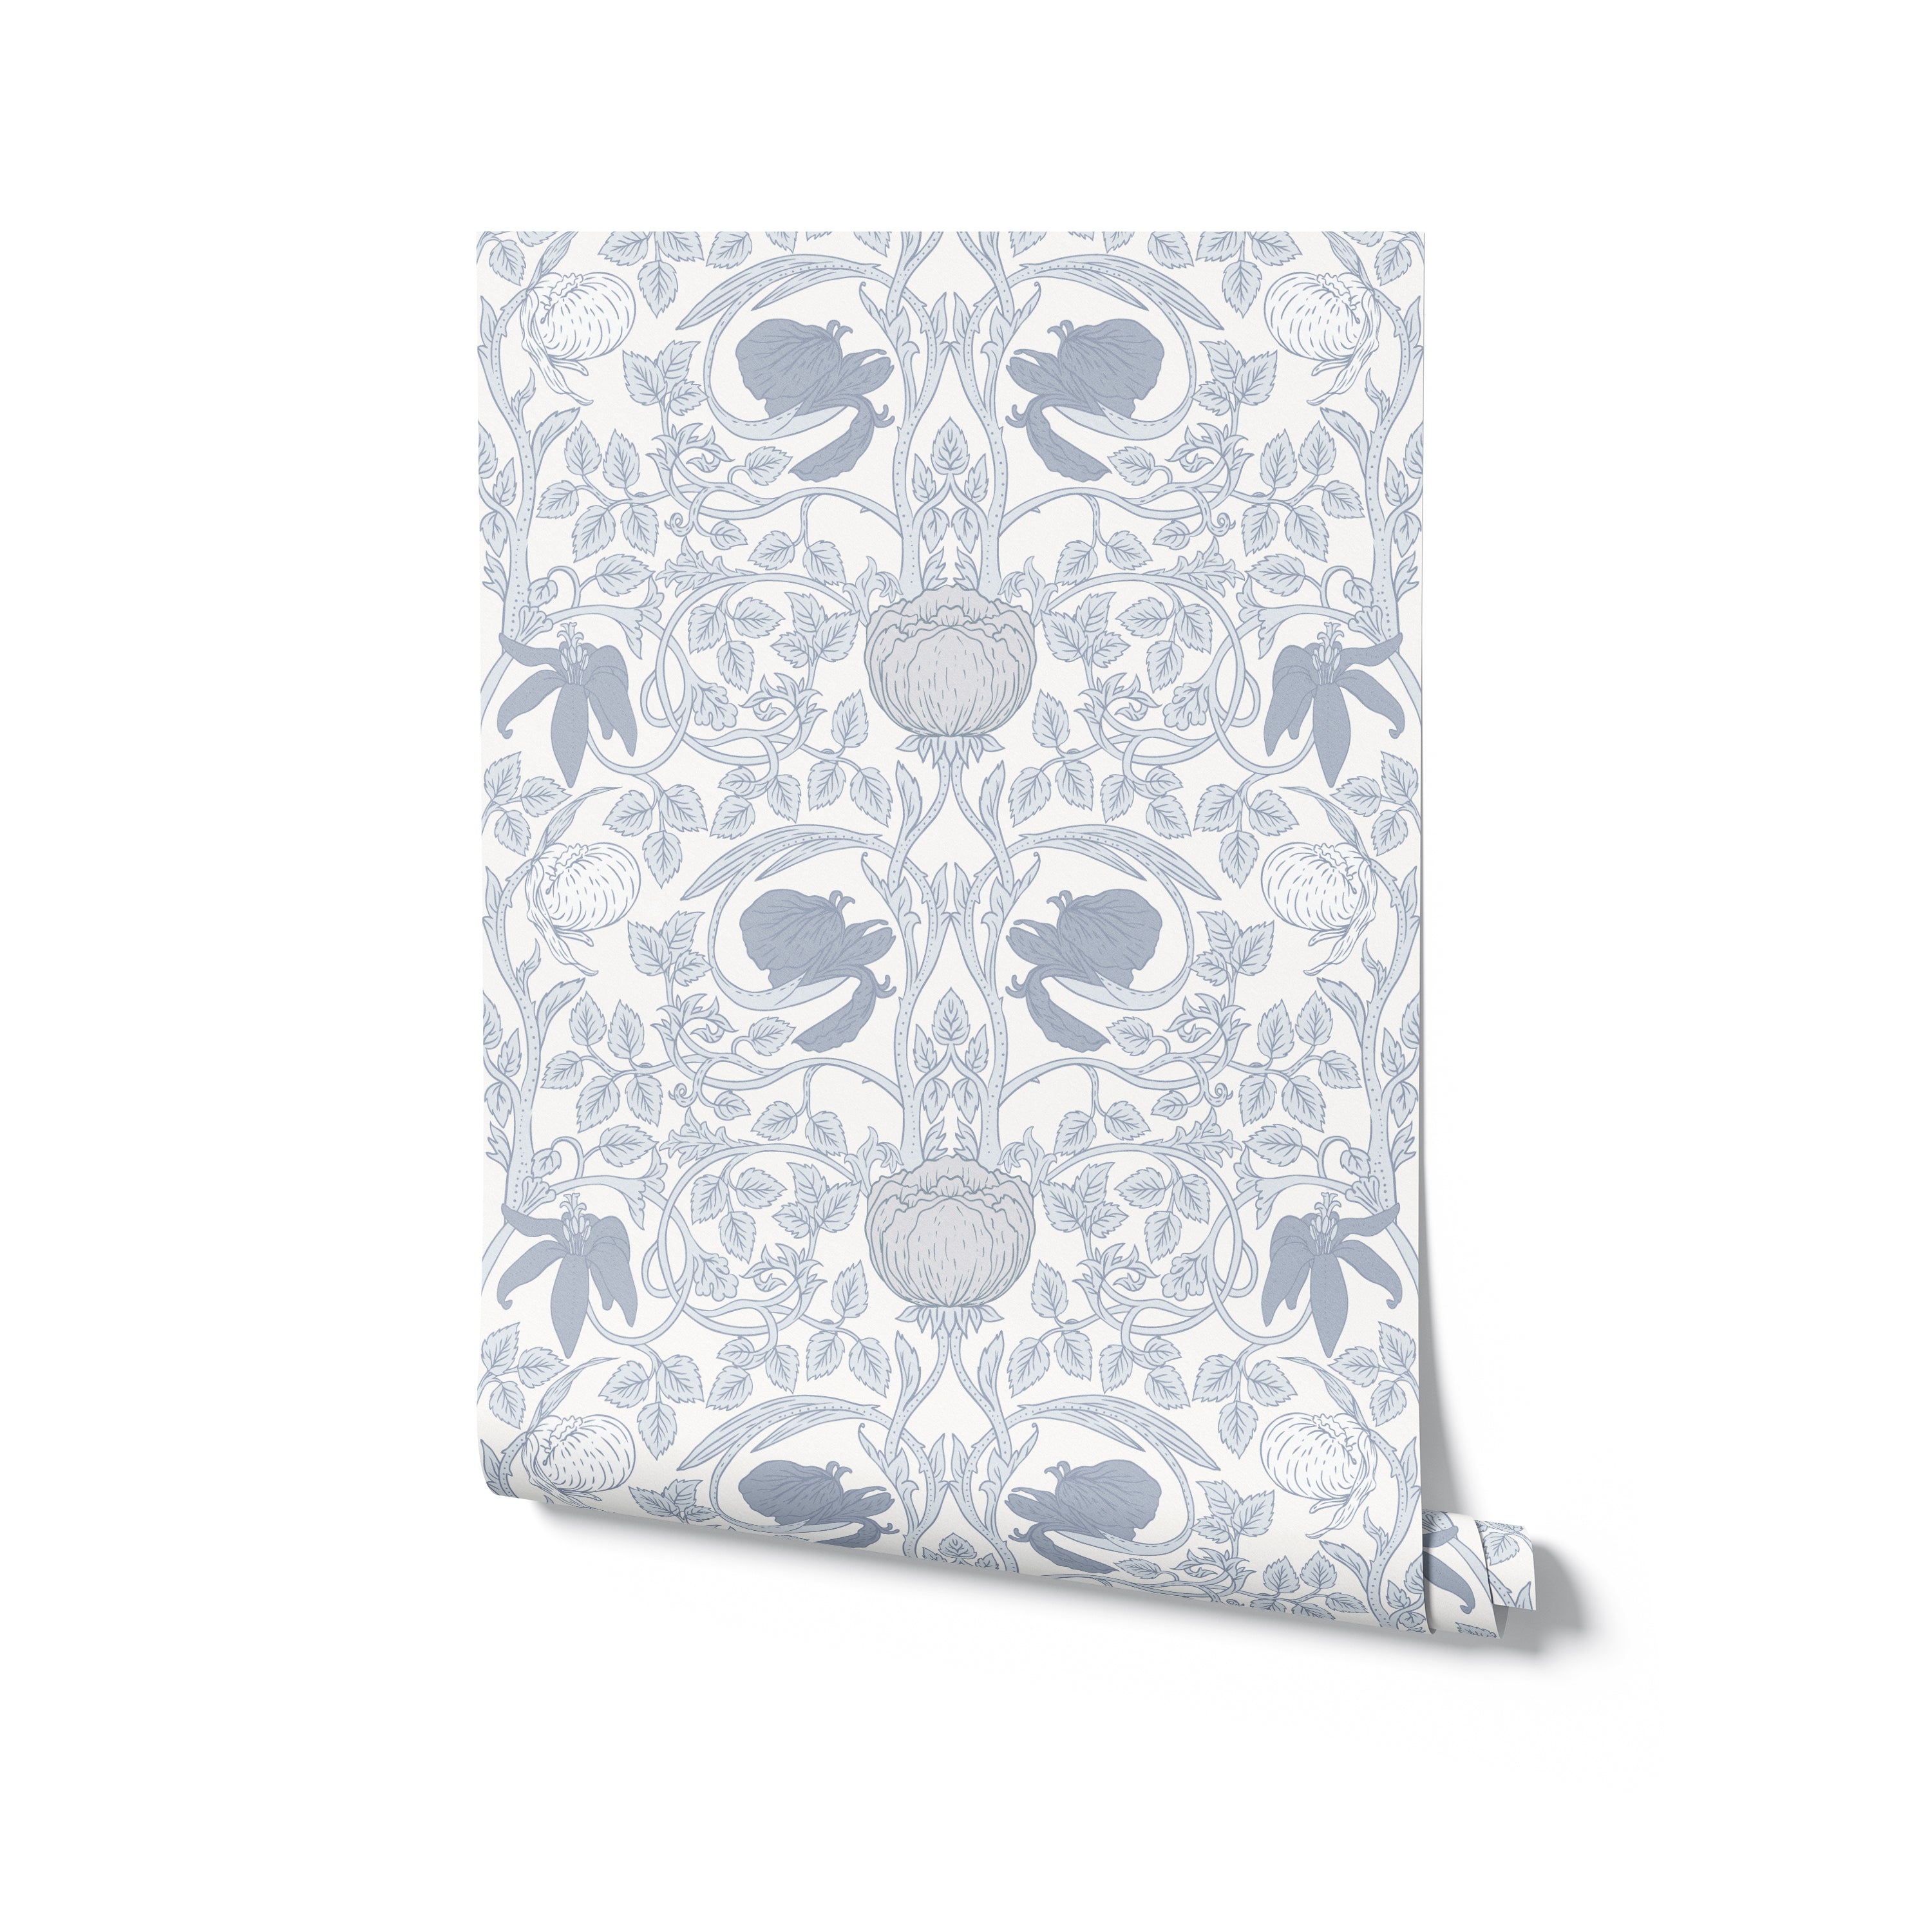 Rolled view of the Vintage Floral Damask Wallpaper displaying the classic blue floral pattern on a white background, ready for application.